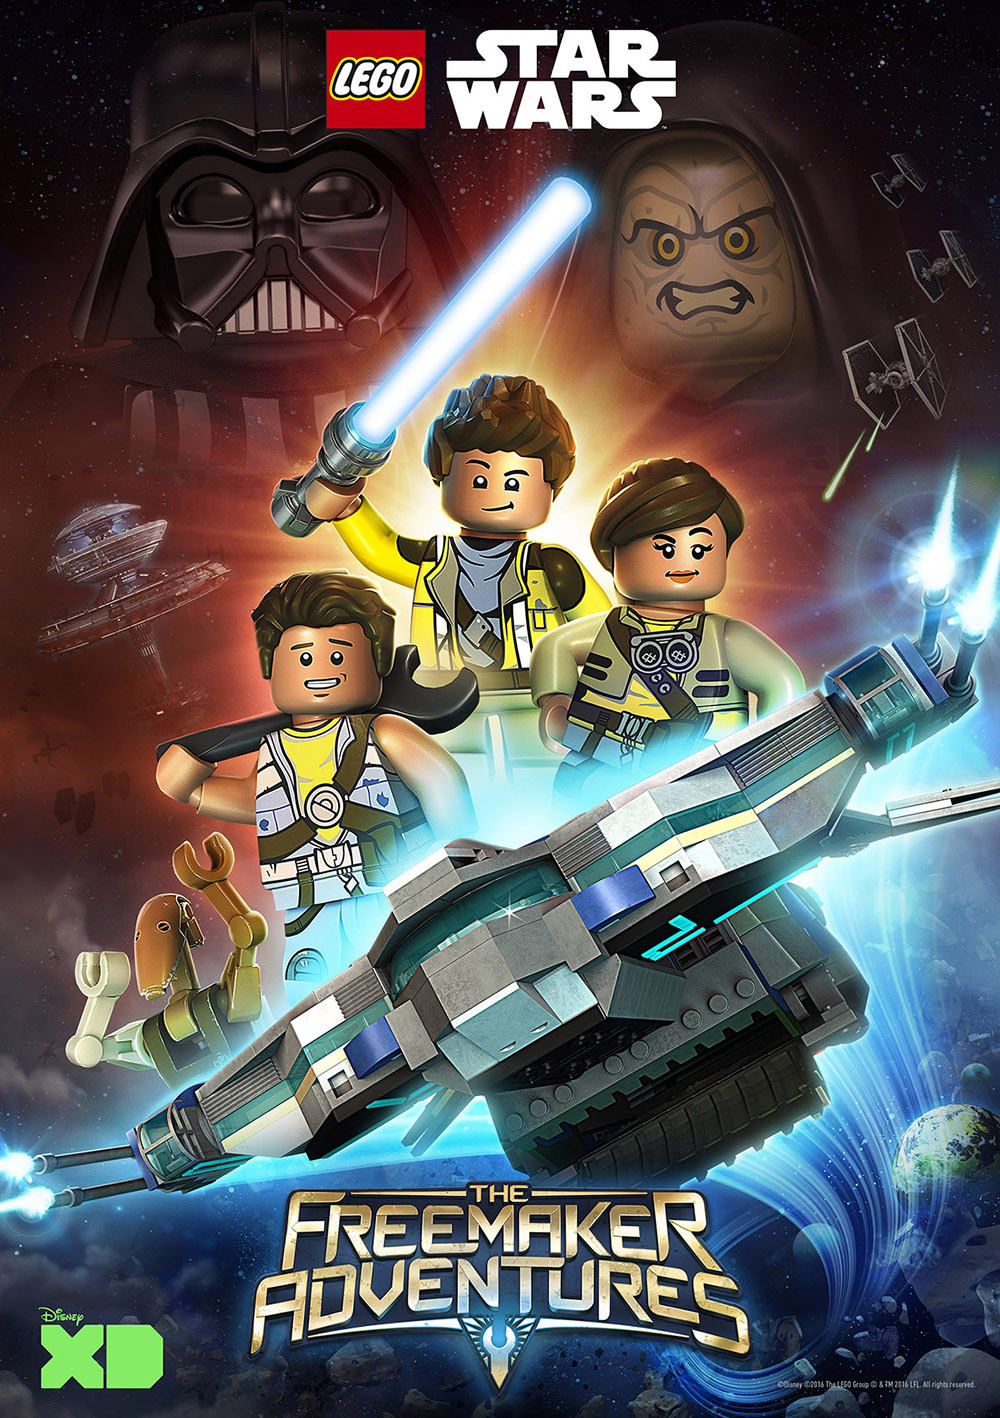 Disney XD to Premiere New LEGO ‘Star Wars’ Animated Series this Summer